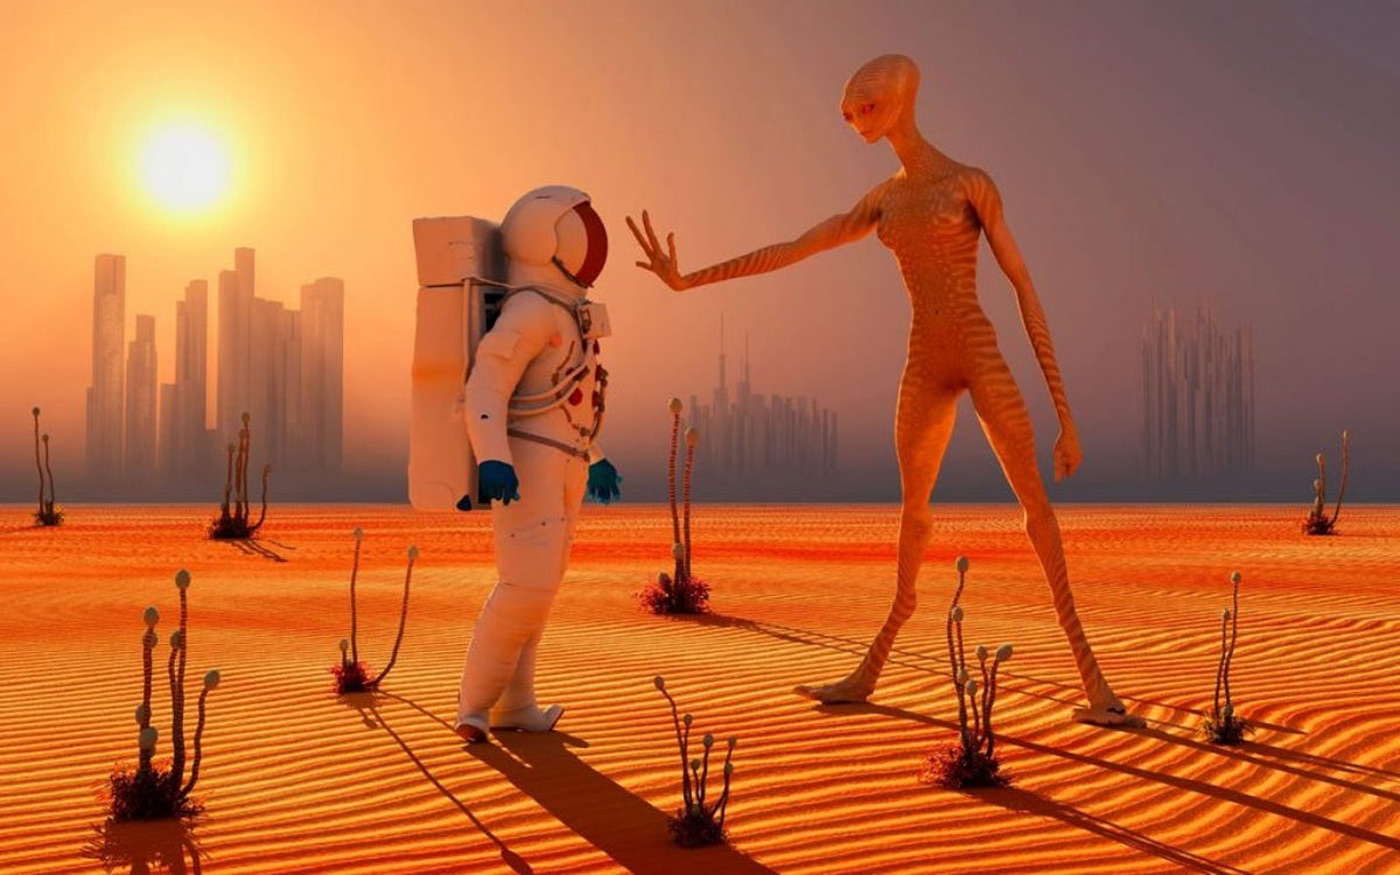 Illustration of an tall alien interacting with a human astronaut on a foreign red planet